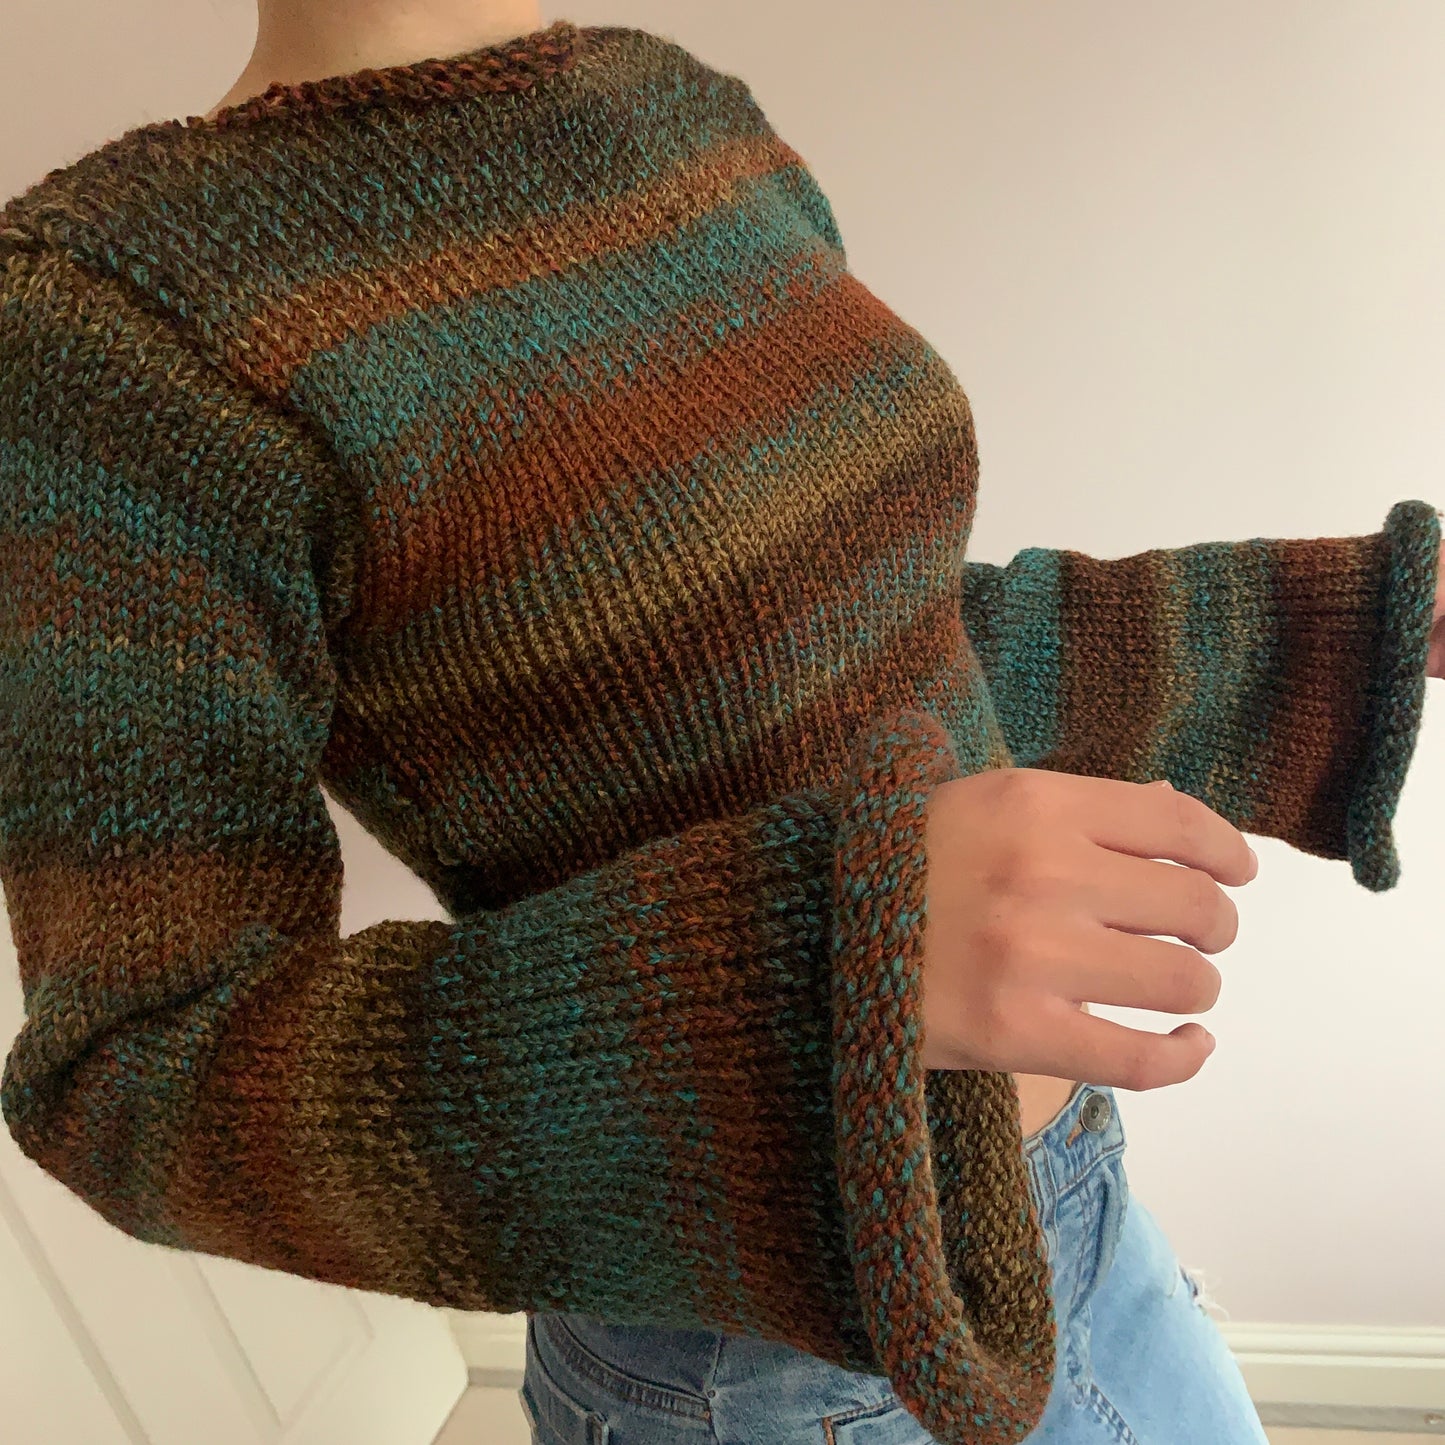 Handmade brown and blue ombré knitted jumper